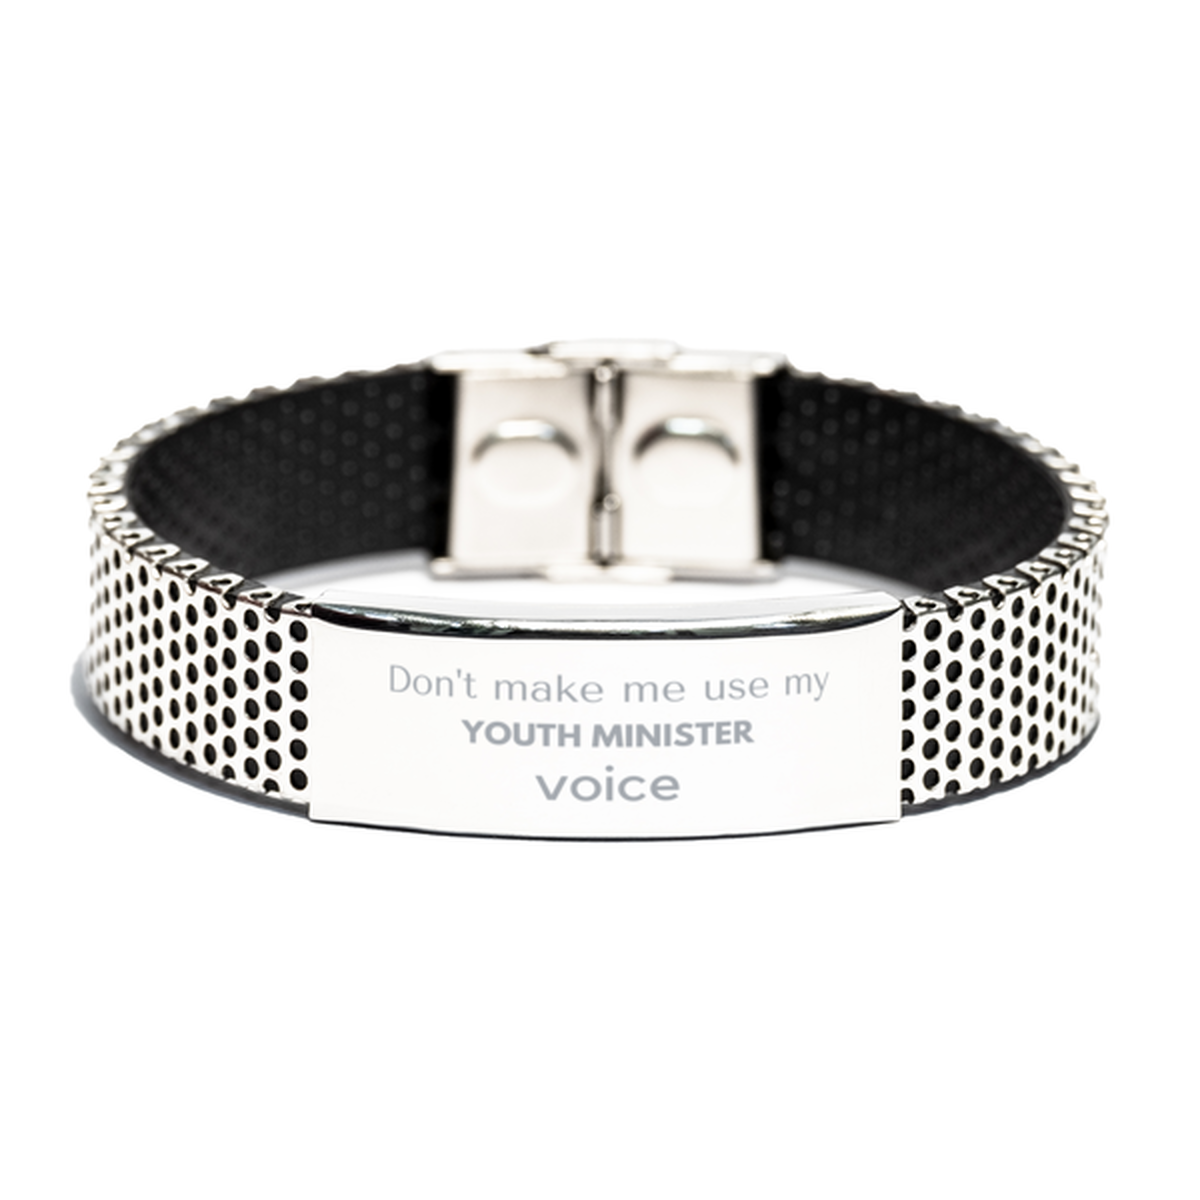 Don't make me use my Youth Minister voice, Sarcasm Youth Minister Gifts, Christmas Youth Minister Stainless Steel Bracelet Birthday Unique Gifts For Youth Minister Coworkers, Men, Women, Colleague, Friends